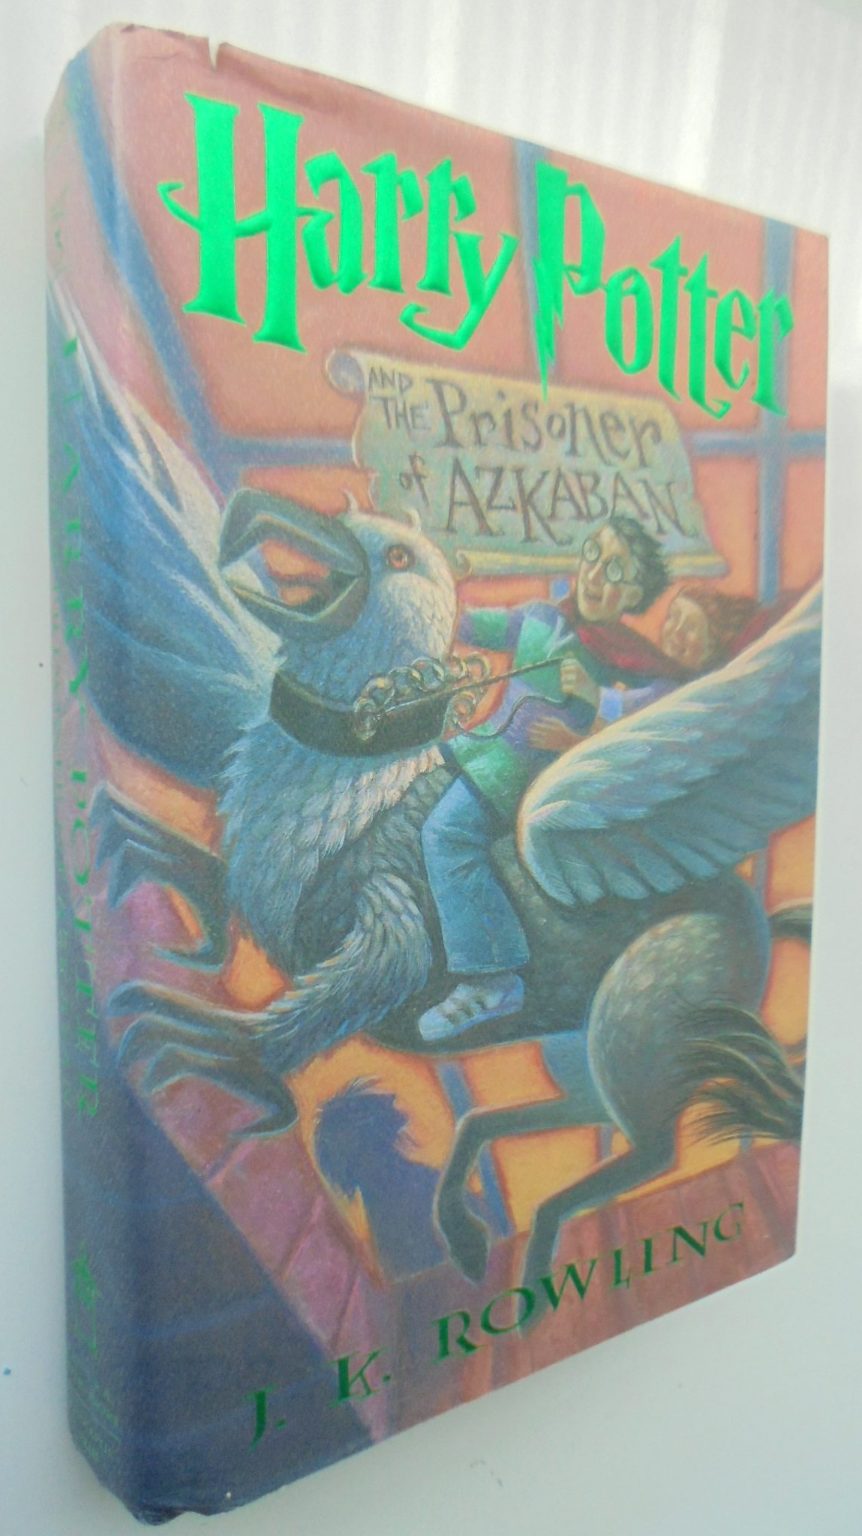 Harry Potter and the Prisoner of Azkaban. First American Edition, 47th printing.